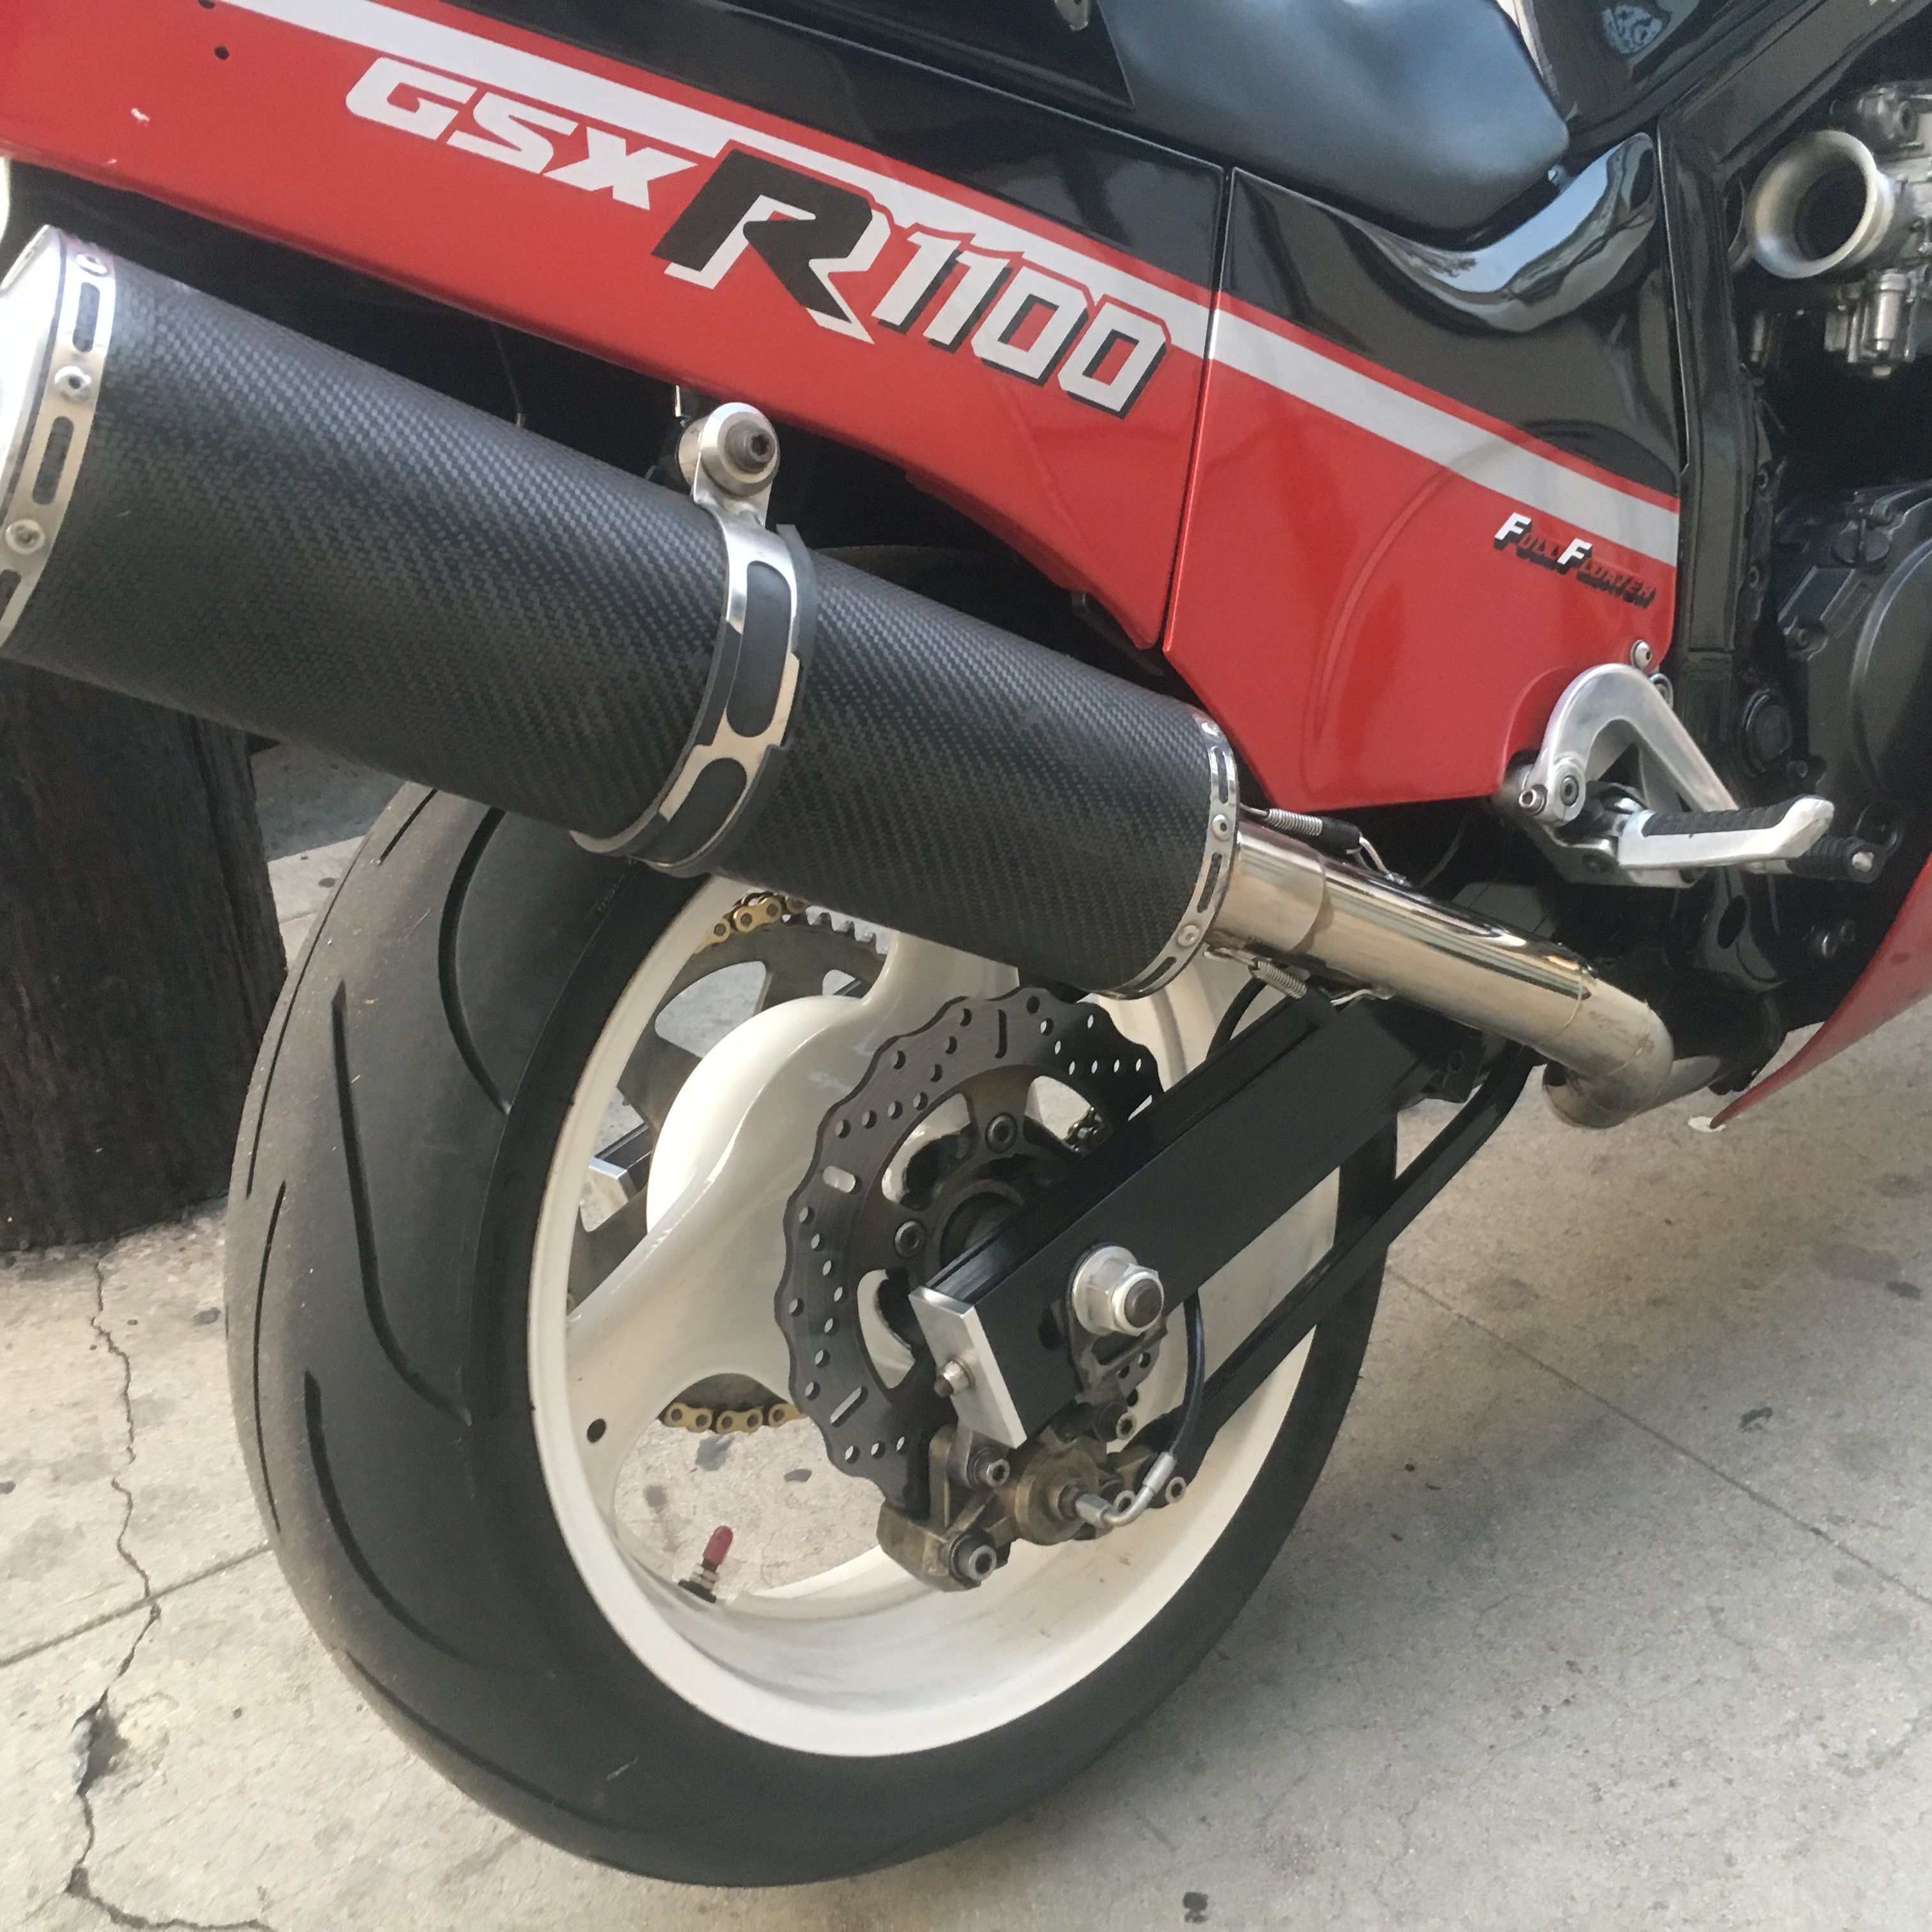 aftermarket carbon exhaust (period appropriate!)